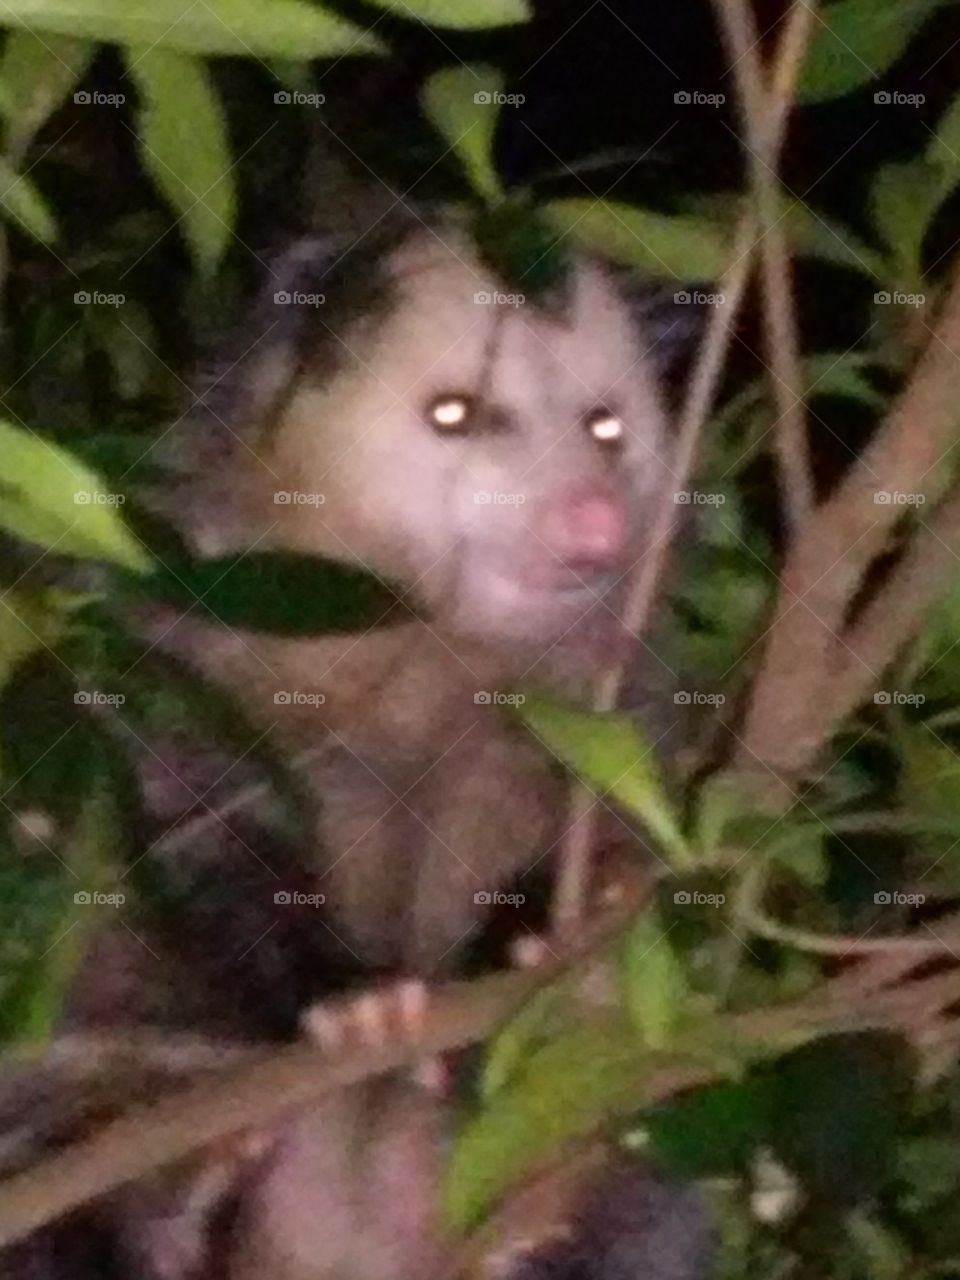 Opossum in my back yard. looks like he's smiling, got to love them.